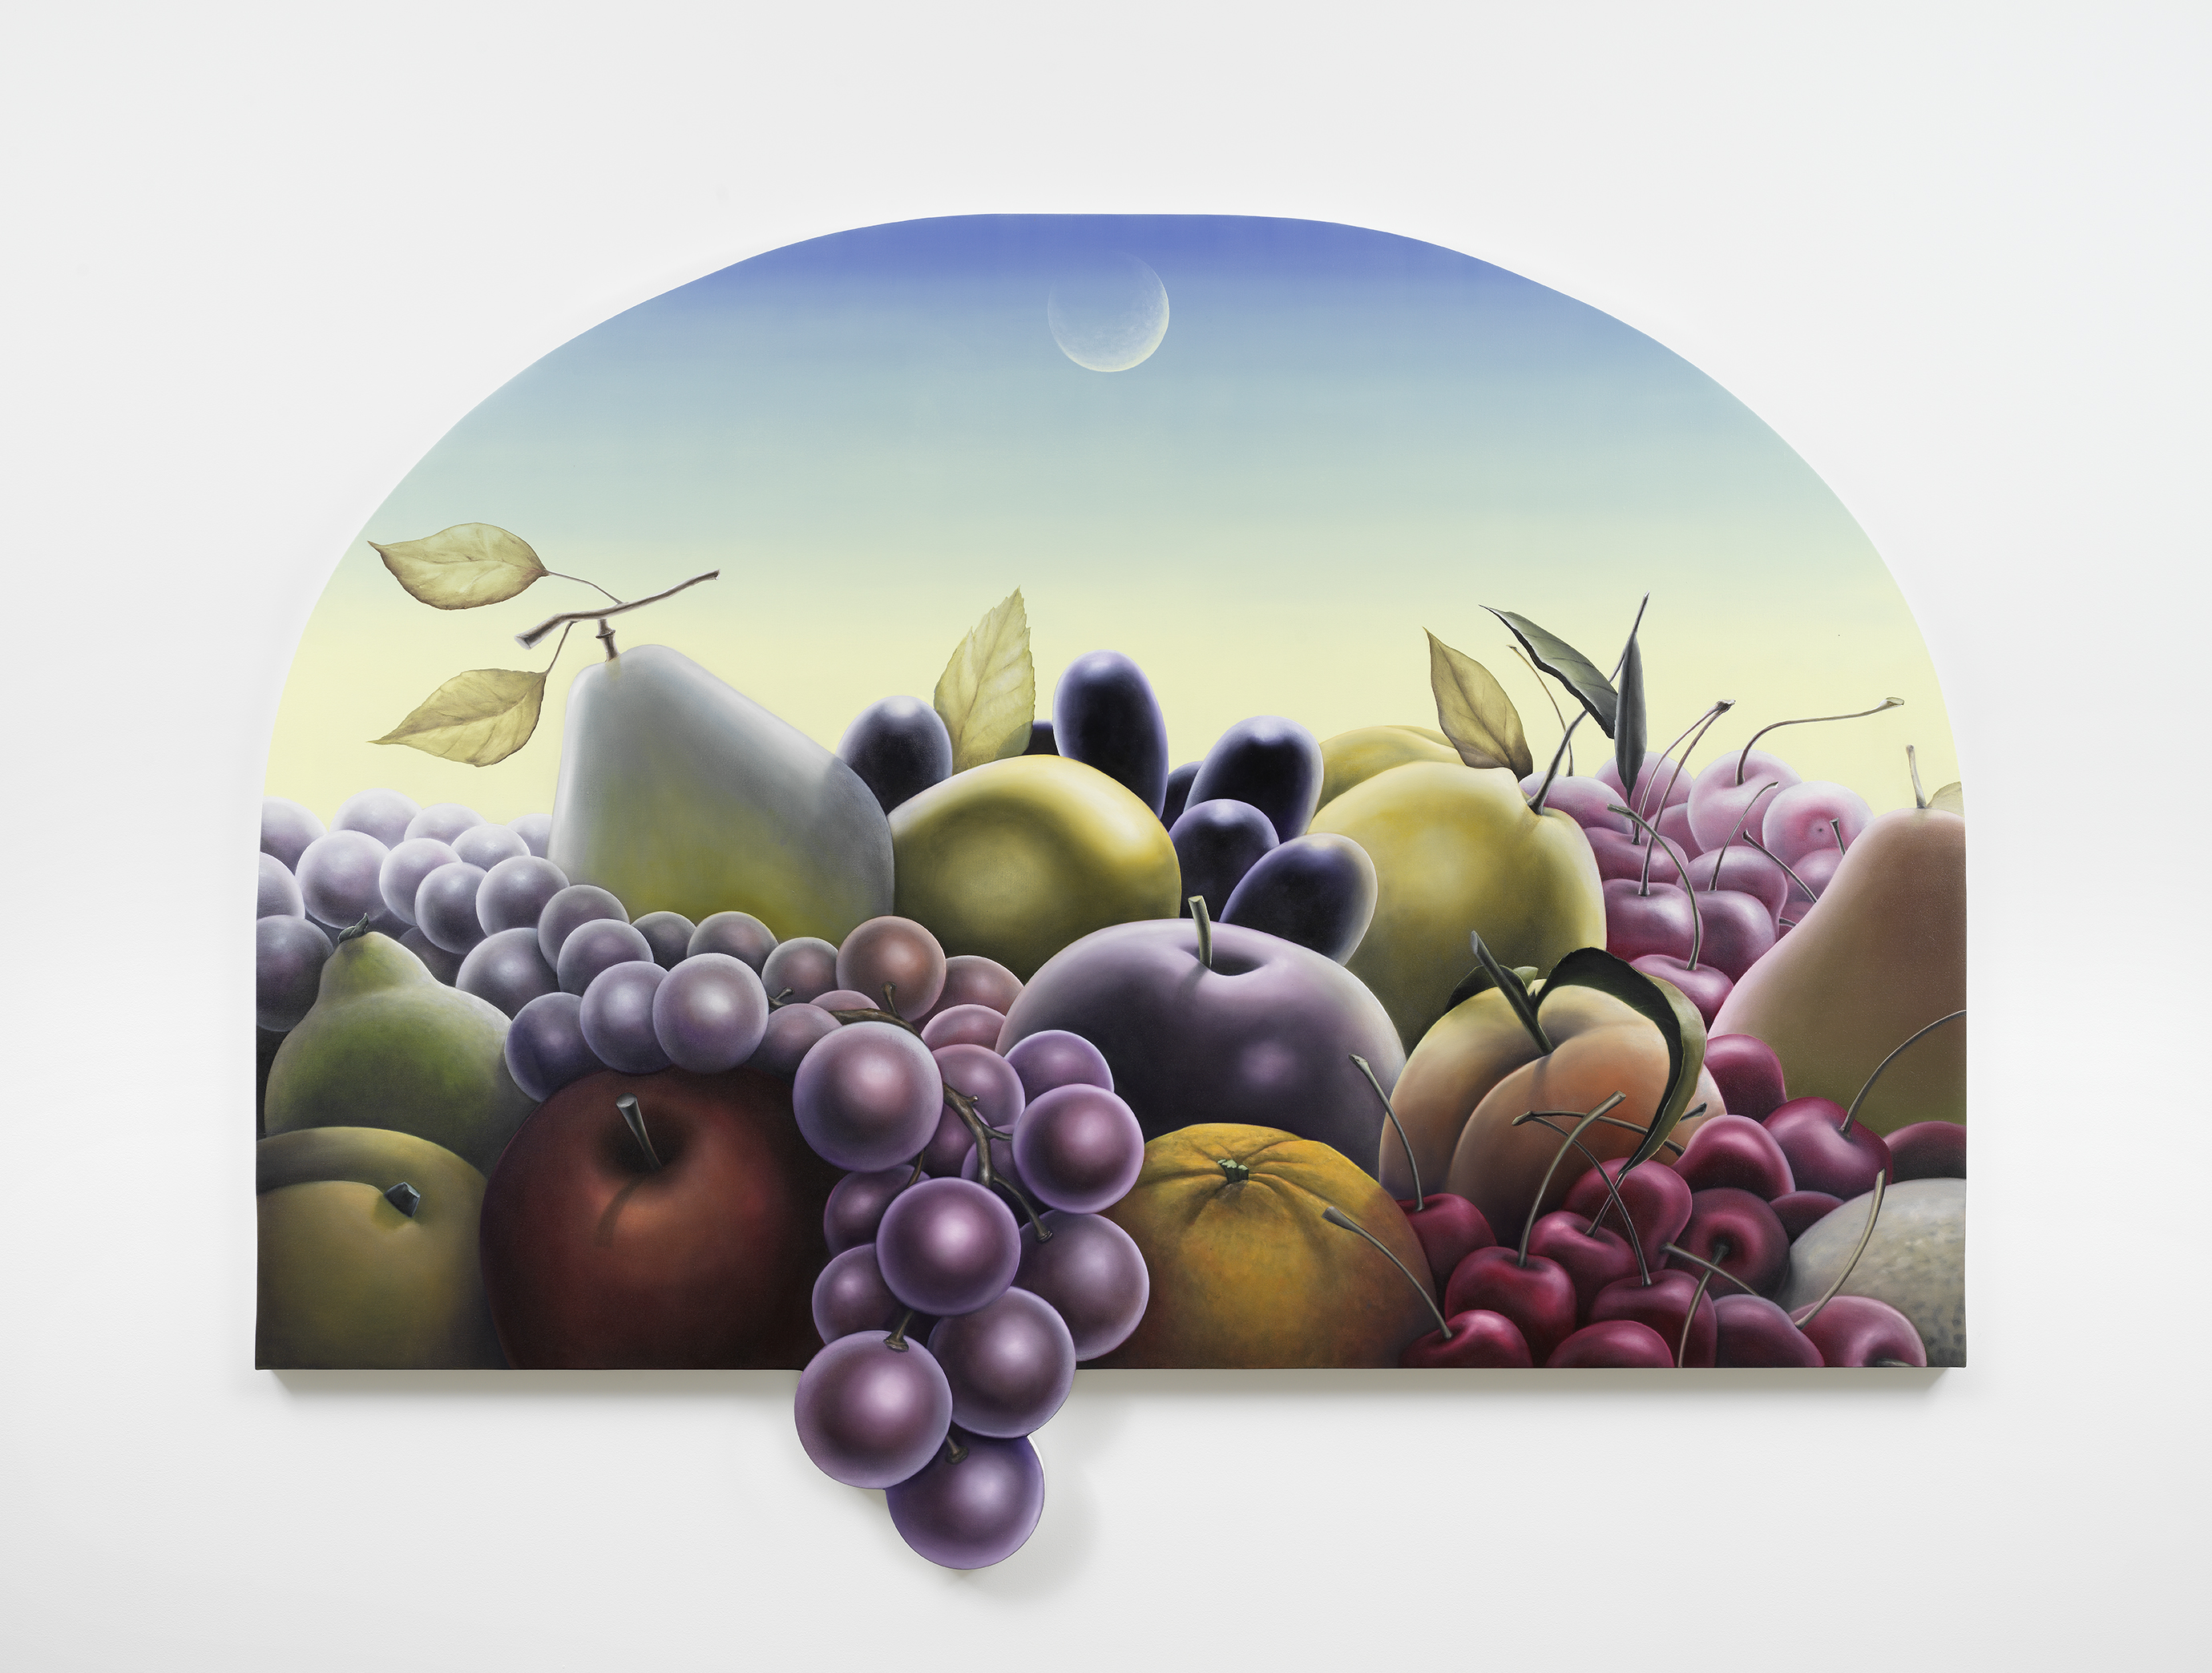 Emily Mae Smith, Fruits of Labour, 2018. Courtesy of the artist and Perrotin.